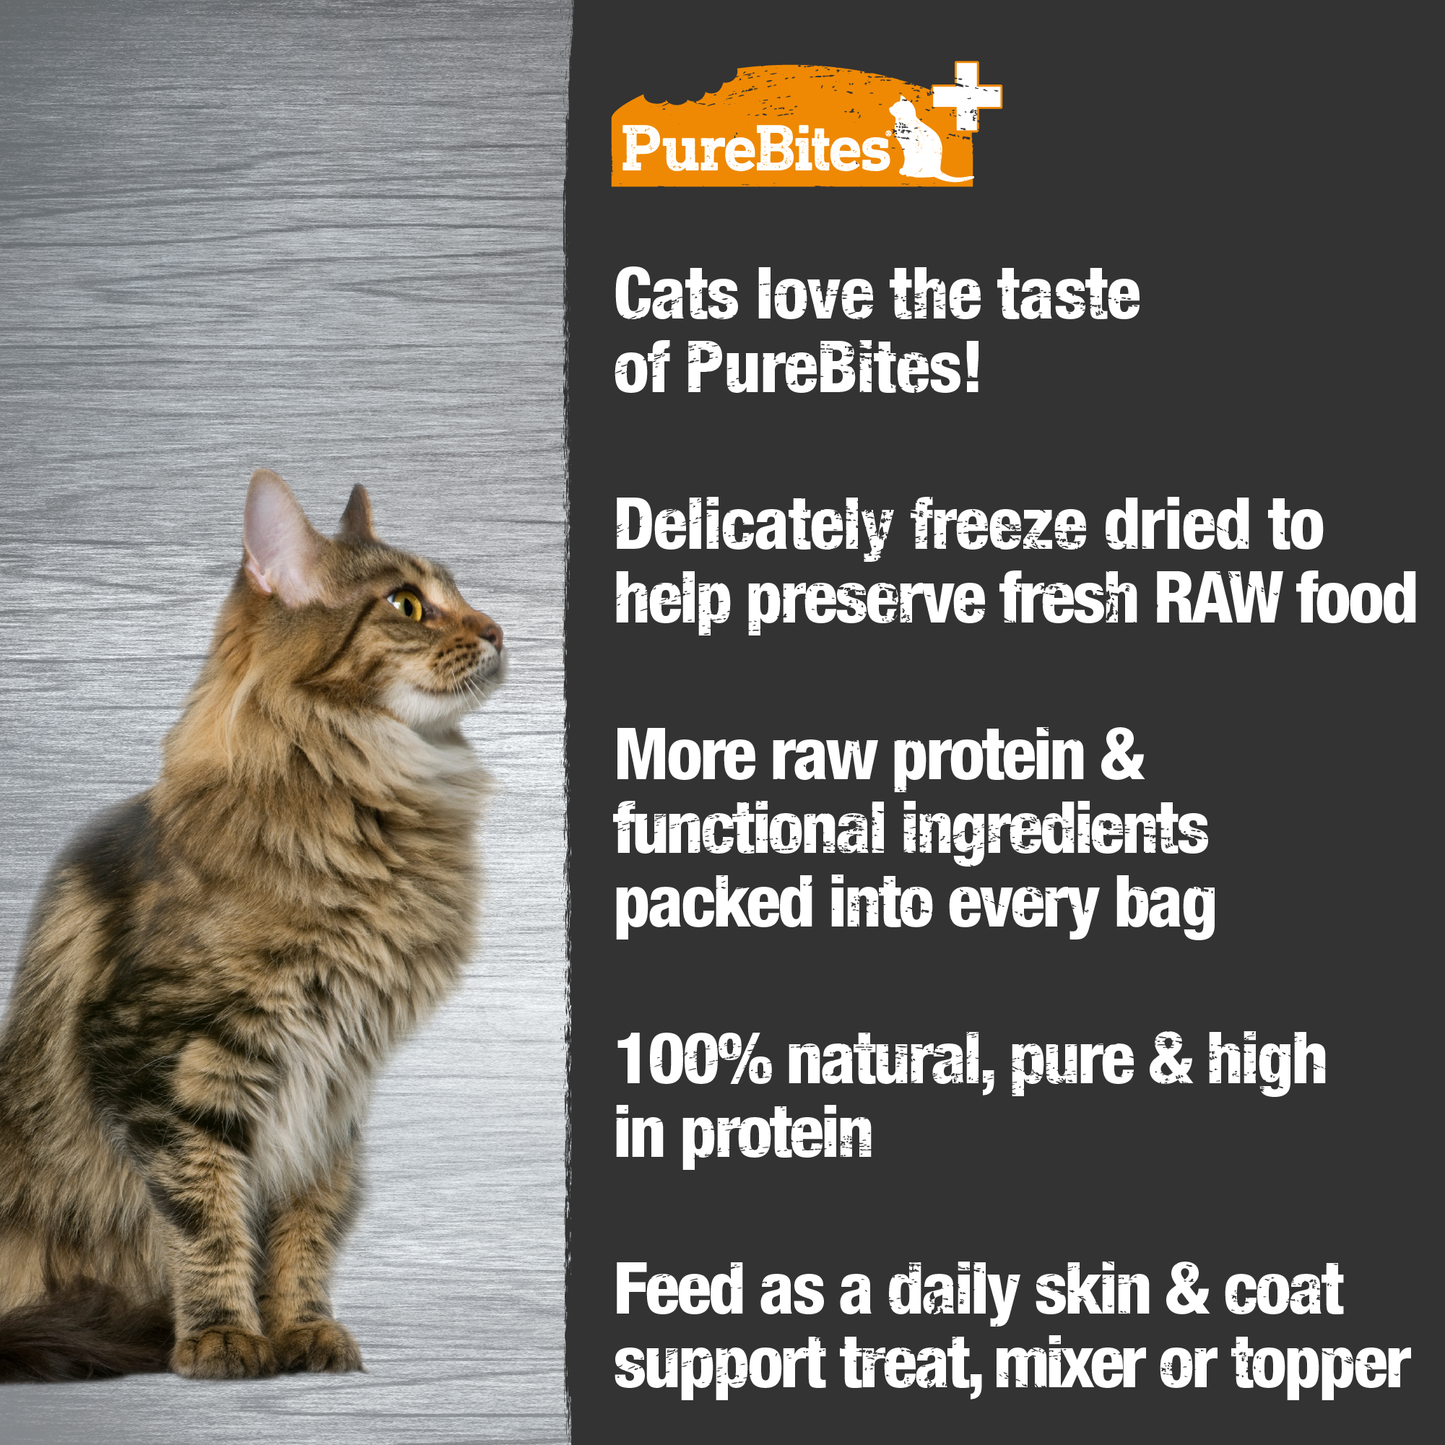 Made fresh & pure means more RAW protein and nutrients packed into every bag. Our skin & coat treats are freeze dried to help preserve their RAW taste, and nutrition, and mirror a cat’s ancestral diet